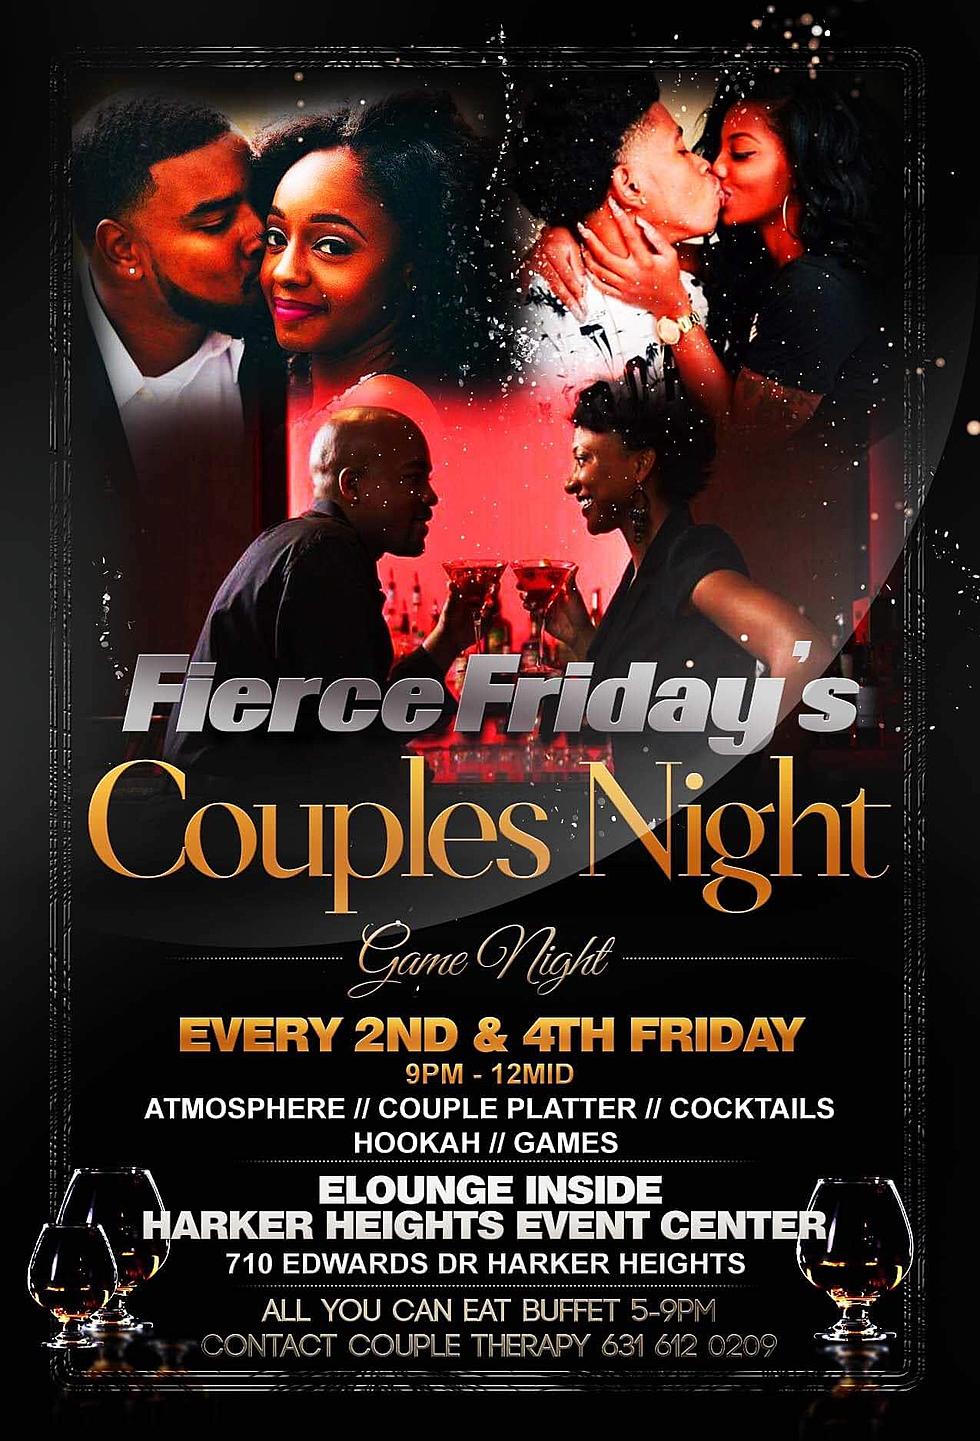 MyKiss1031 Live: Fierce Fridays At The Harker Heights E-Lounge